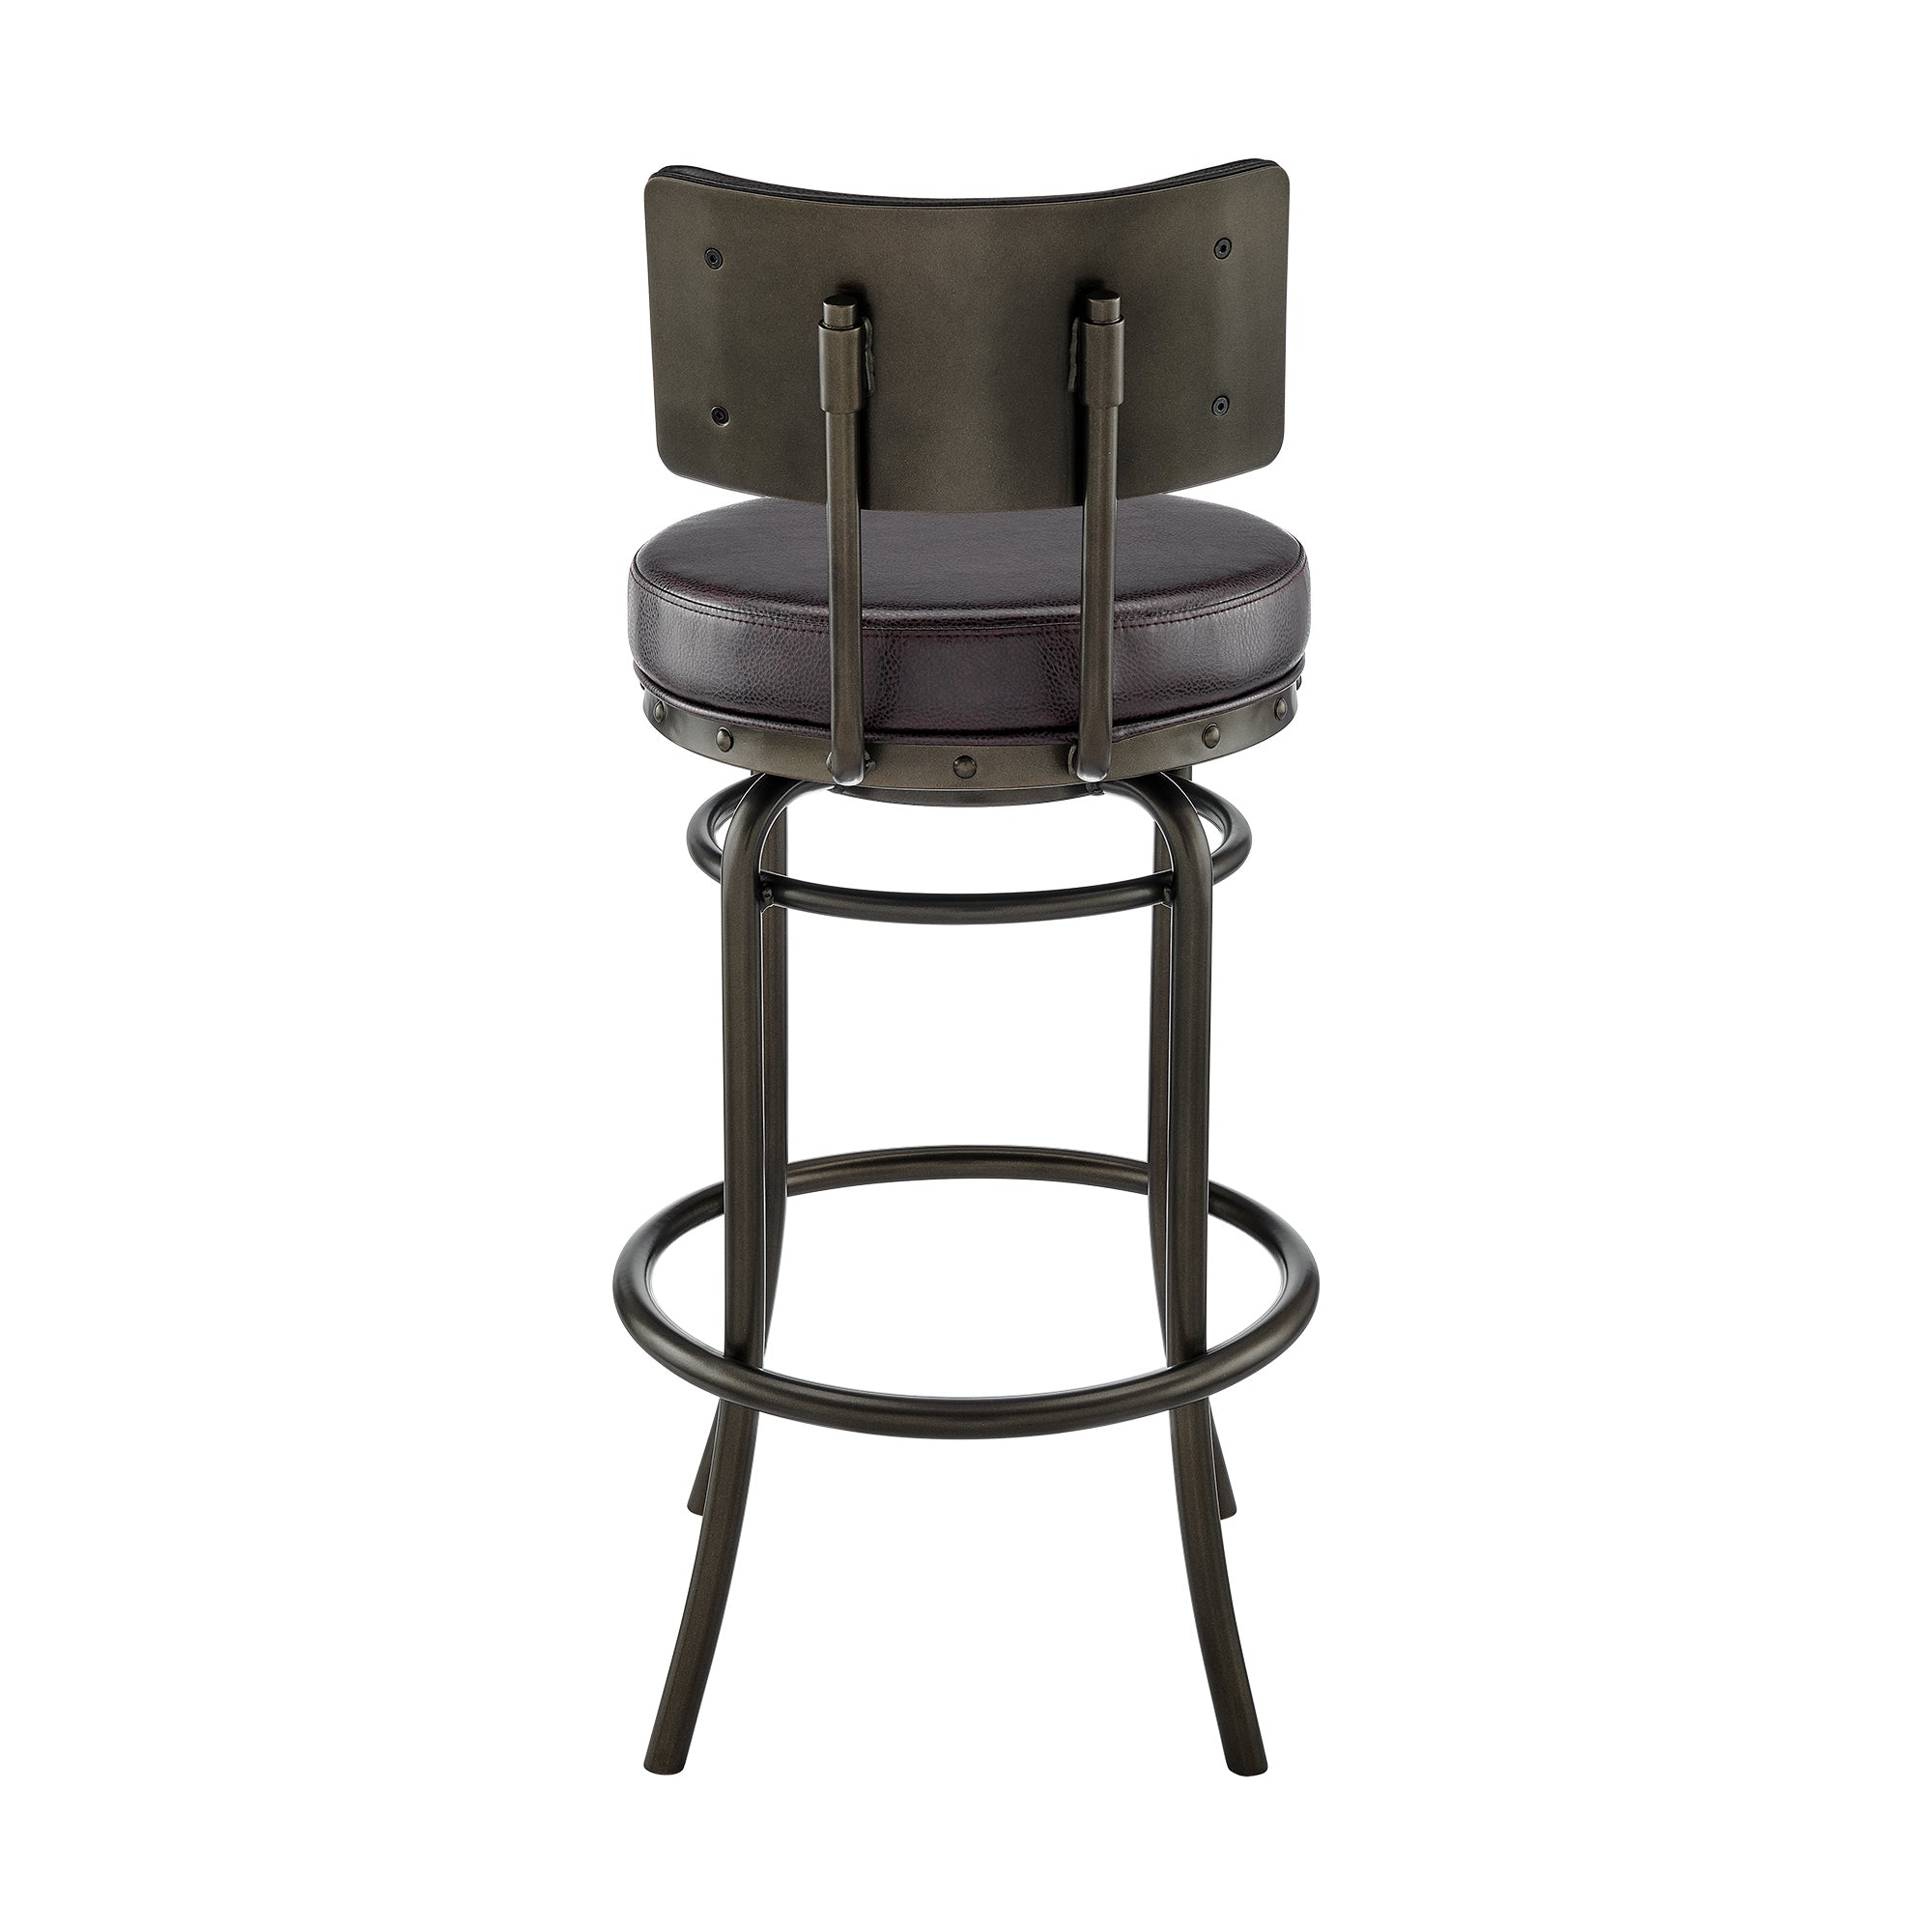 Armen Living - Rees Swivel Counter or Bar Stool in Metal with Faux Leather - 840254333611